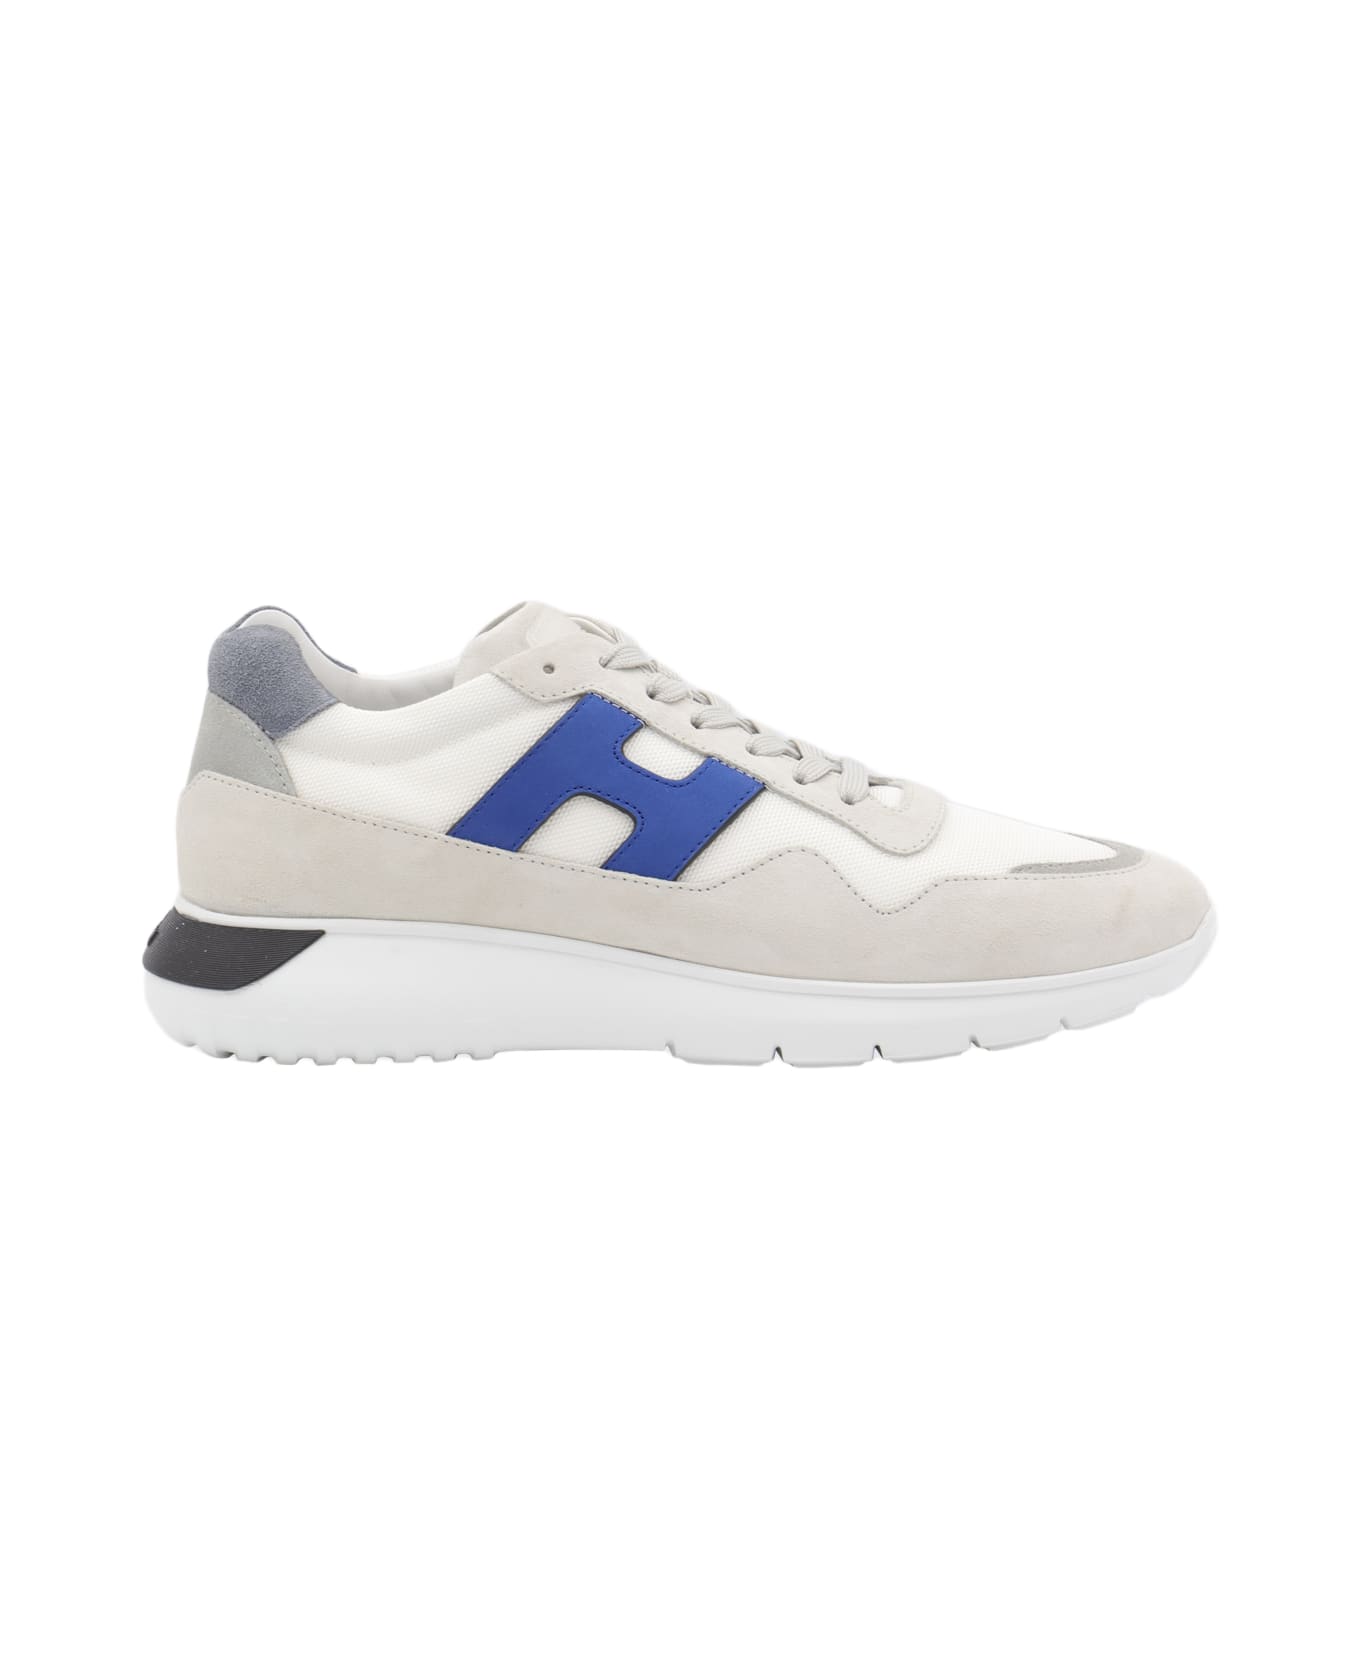 Hogan White Leather Sneakers - grey/blue